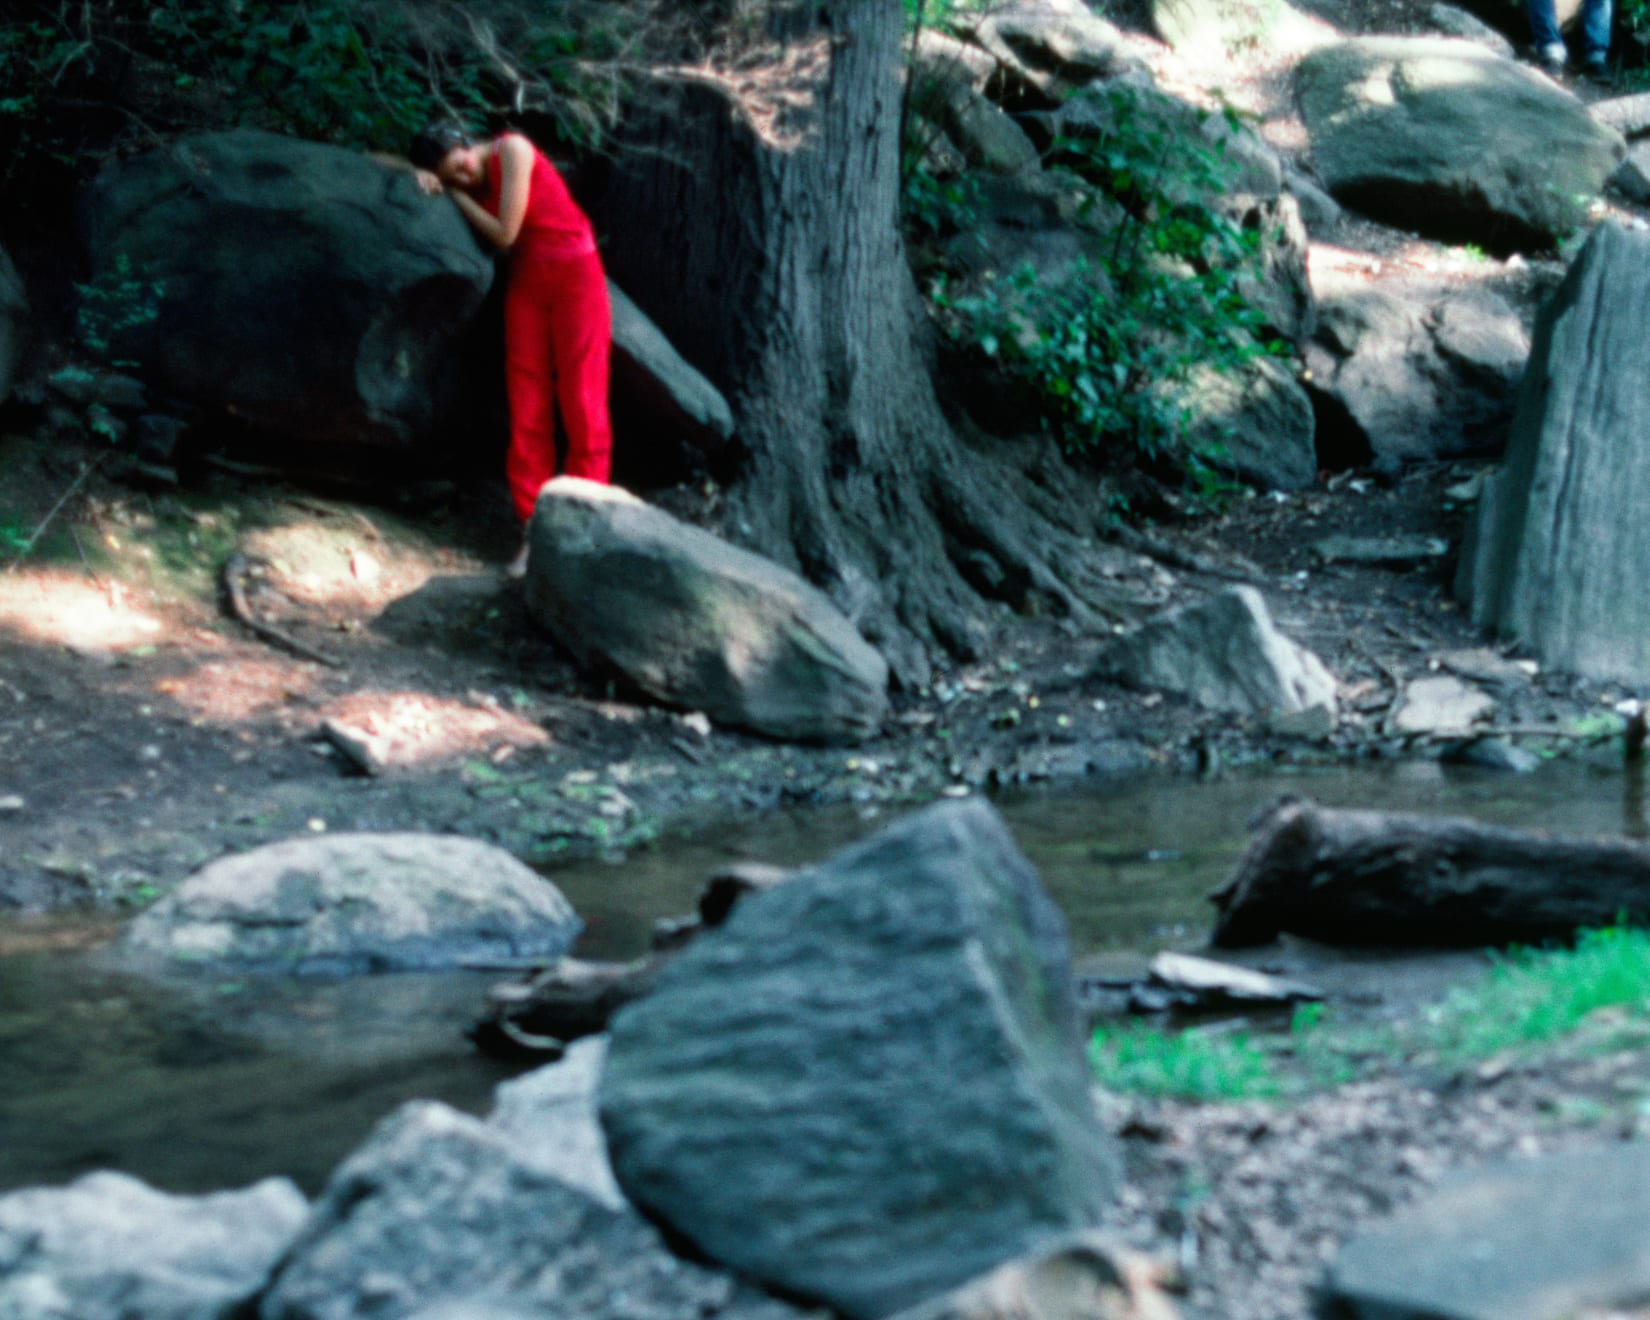 Lorraine O'Grady, Rivers, First Draft: The Teenager in Magenta stands depressed on the bank of the stream, 1982/2015